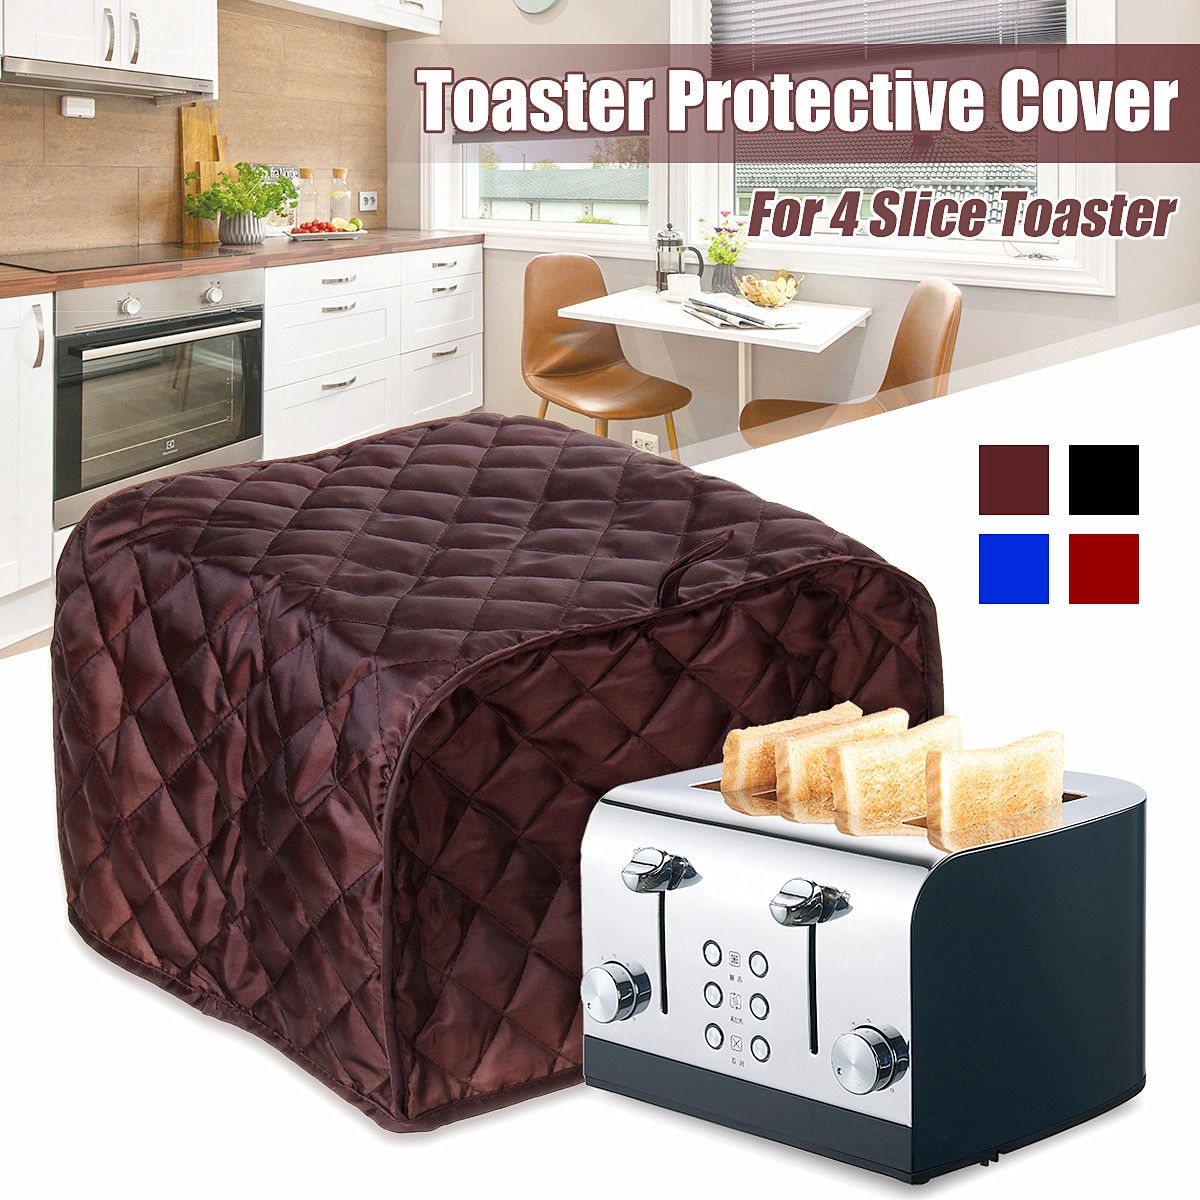 4-Slice-Toaster-Bakeware-Cover-Protector-Dustproof-Kitchen-Clean-Tool-1520791